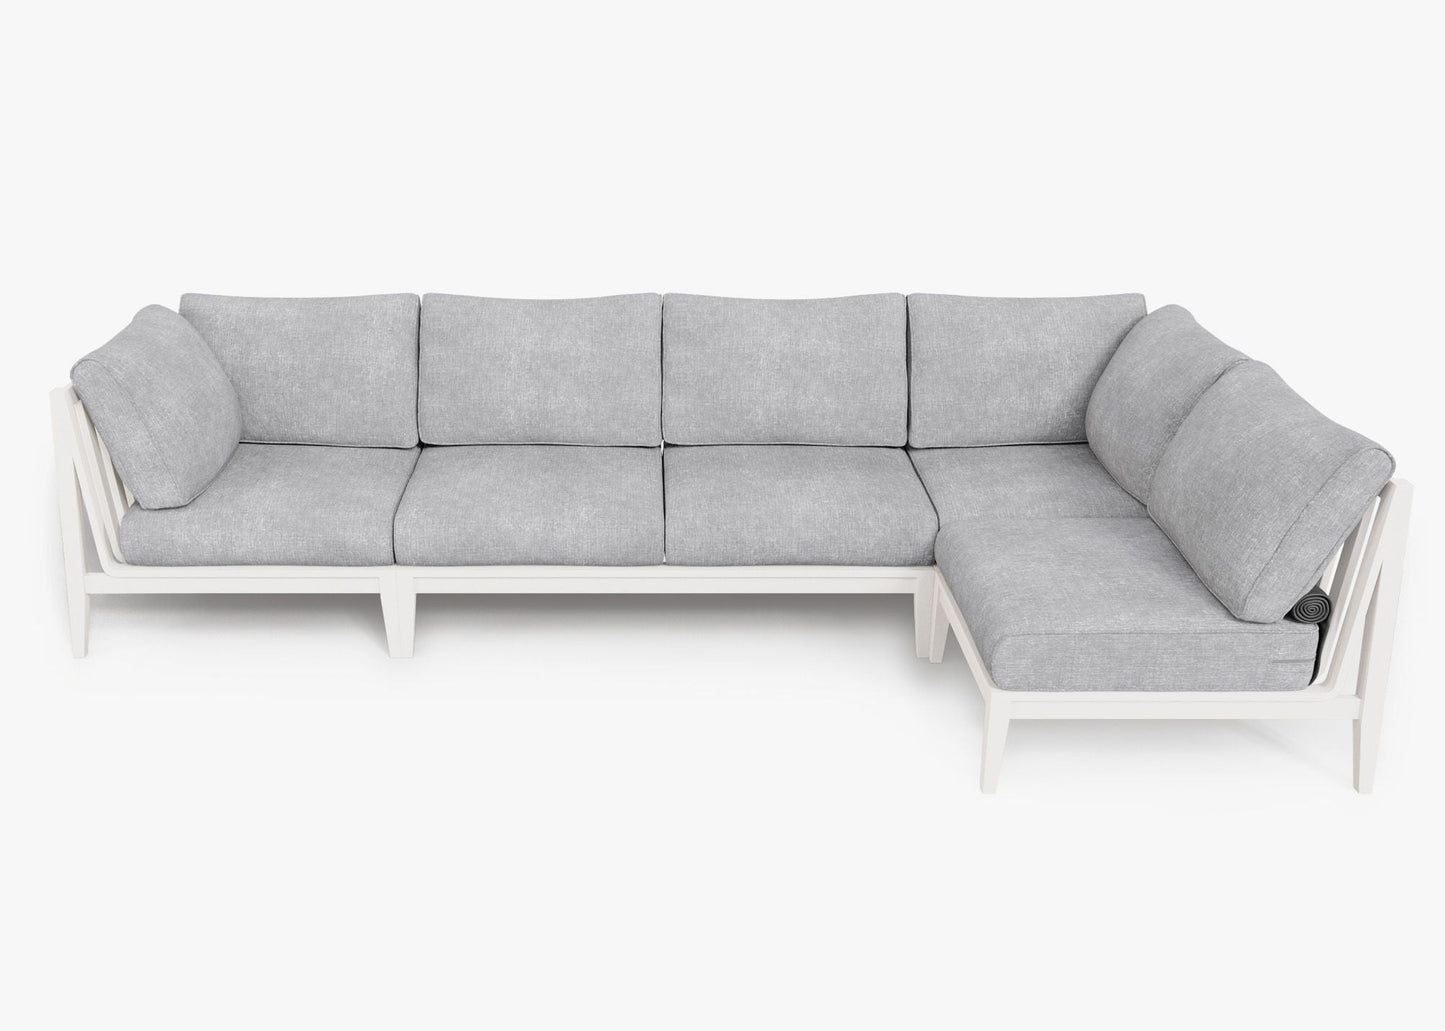 Live Outer 127" x 64" White Aluminum Outdoor L Shape Sectional 5-Seat With Pacific Fog Gray Cushion